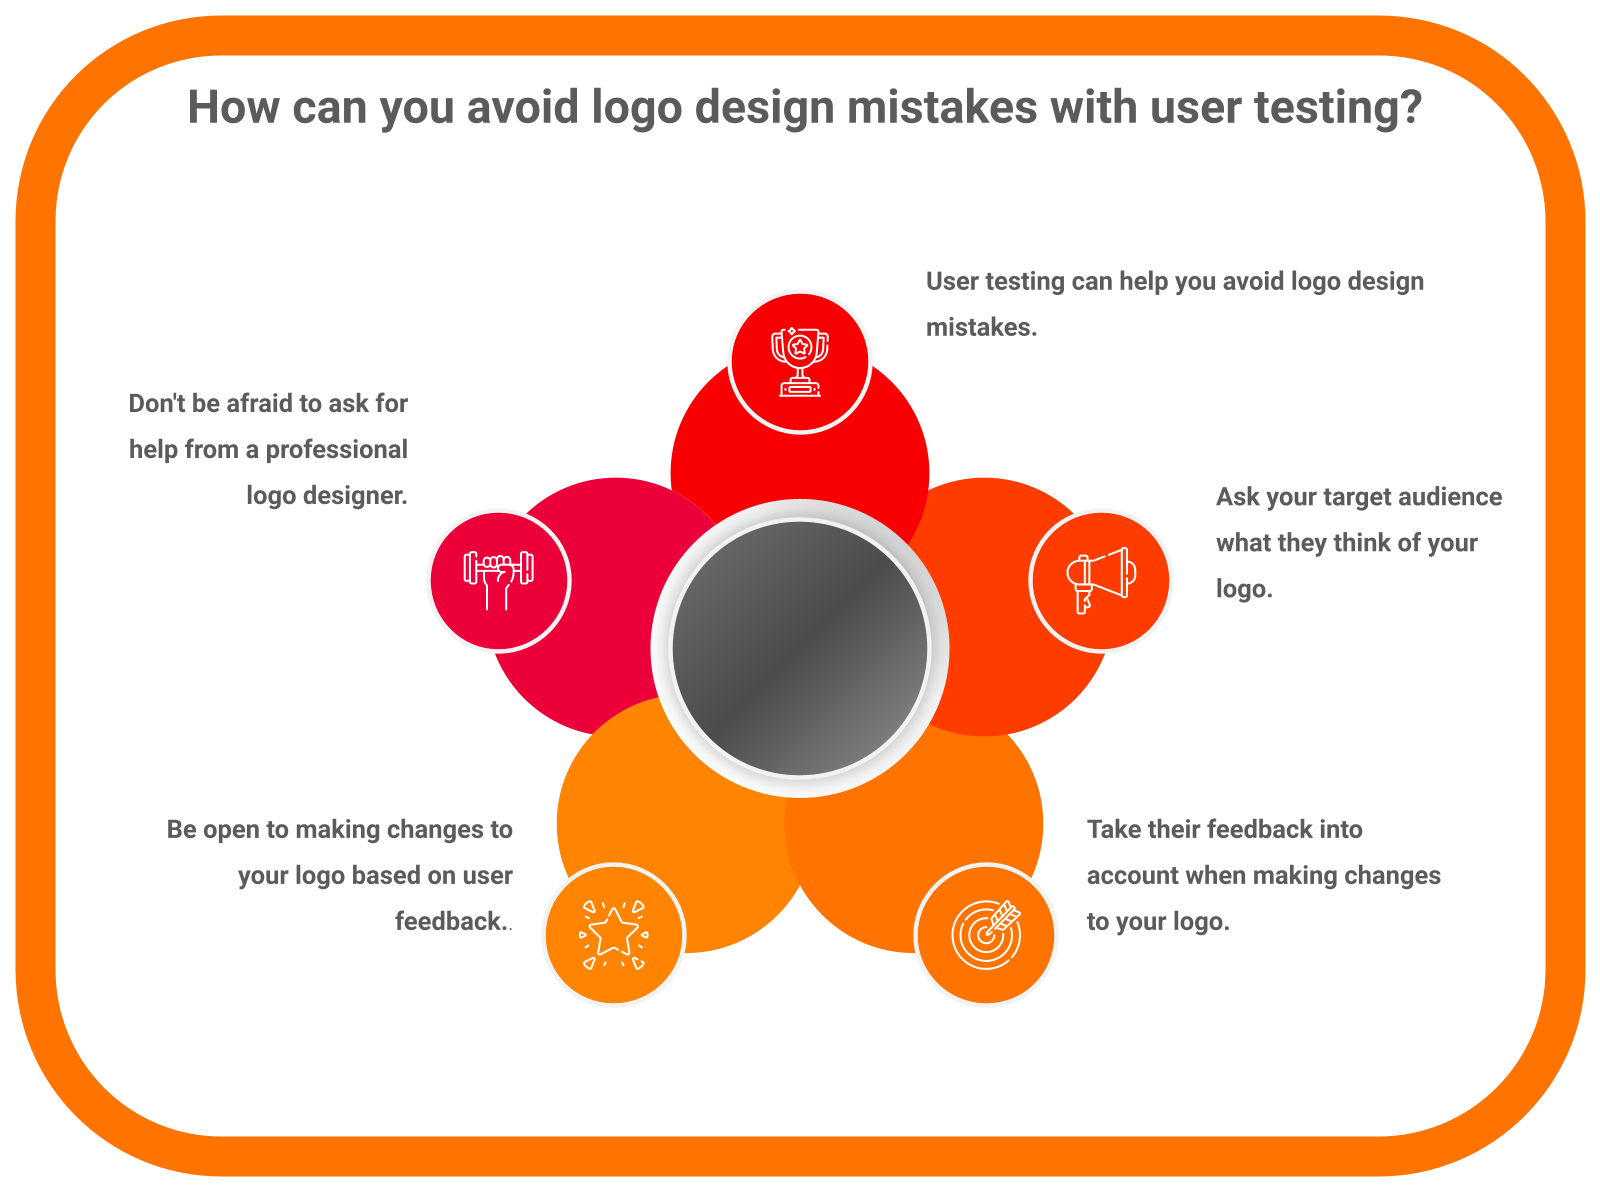 How can you avoid logo design mistakes with user testing?